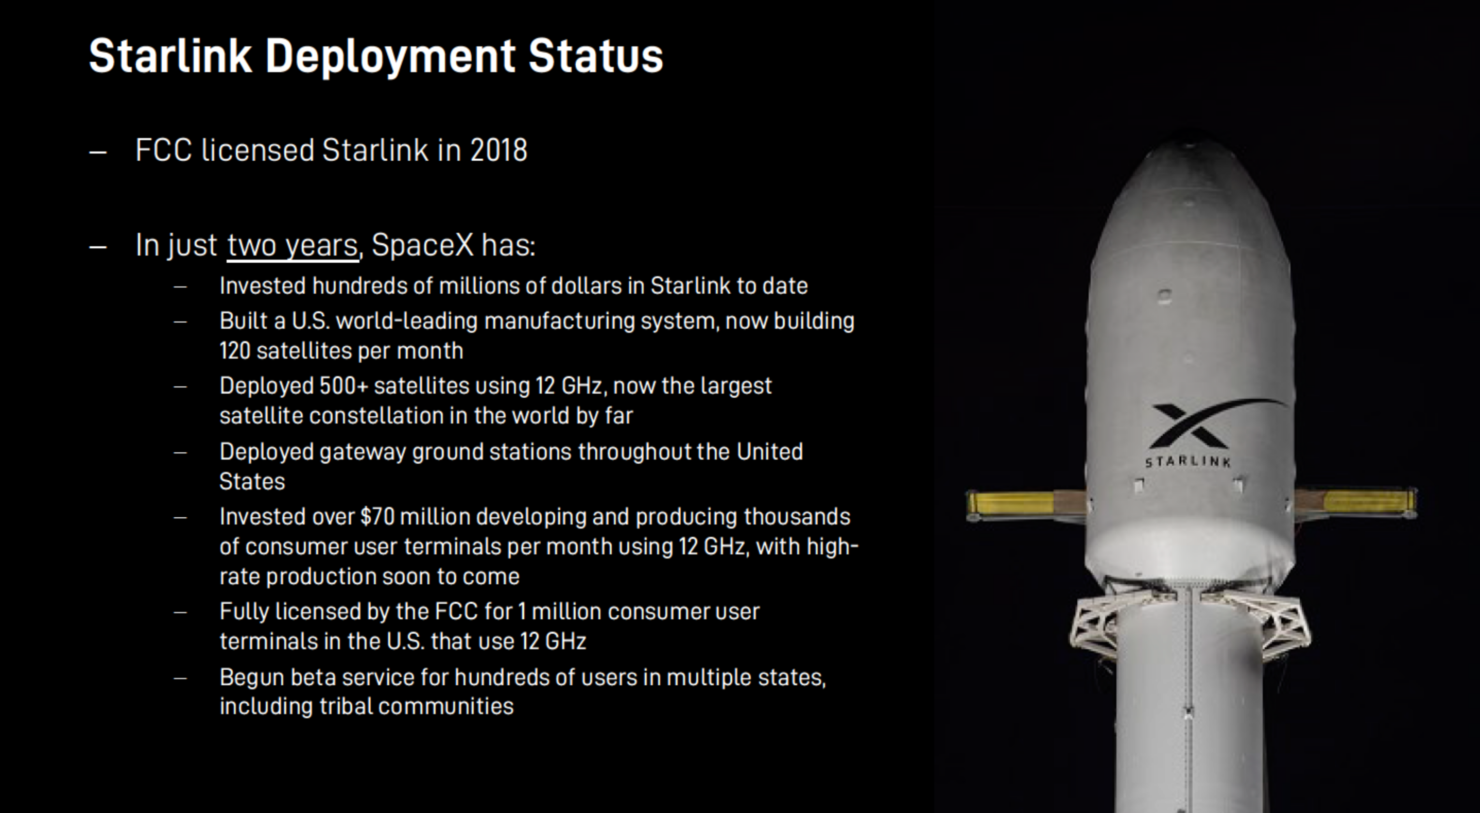 SpaceX invested over $70 million in Starlink Production